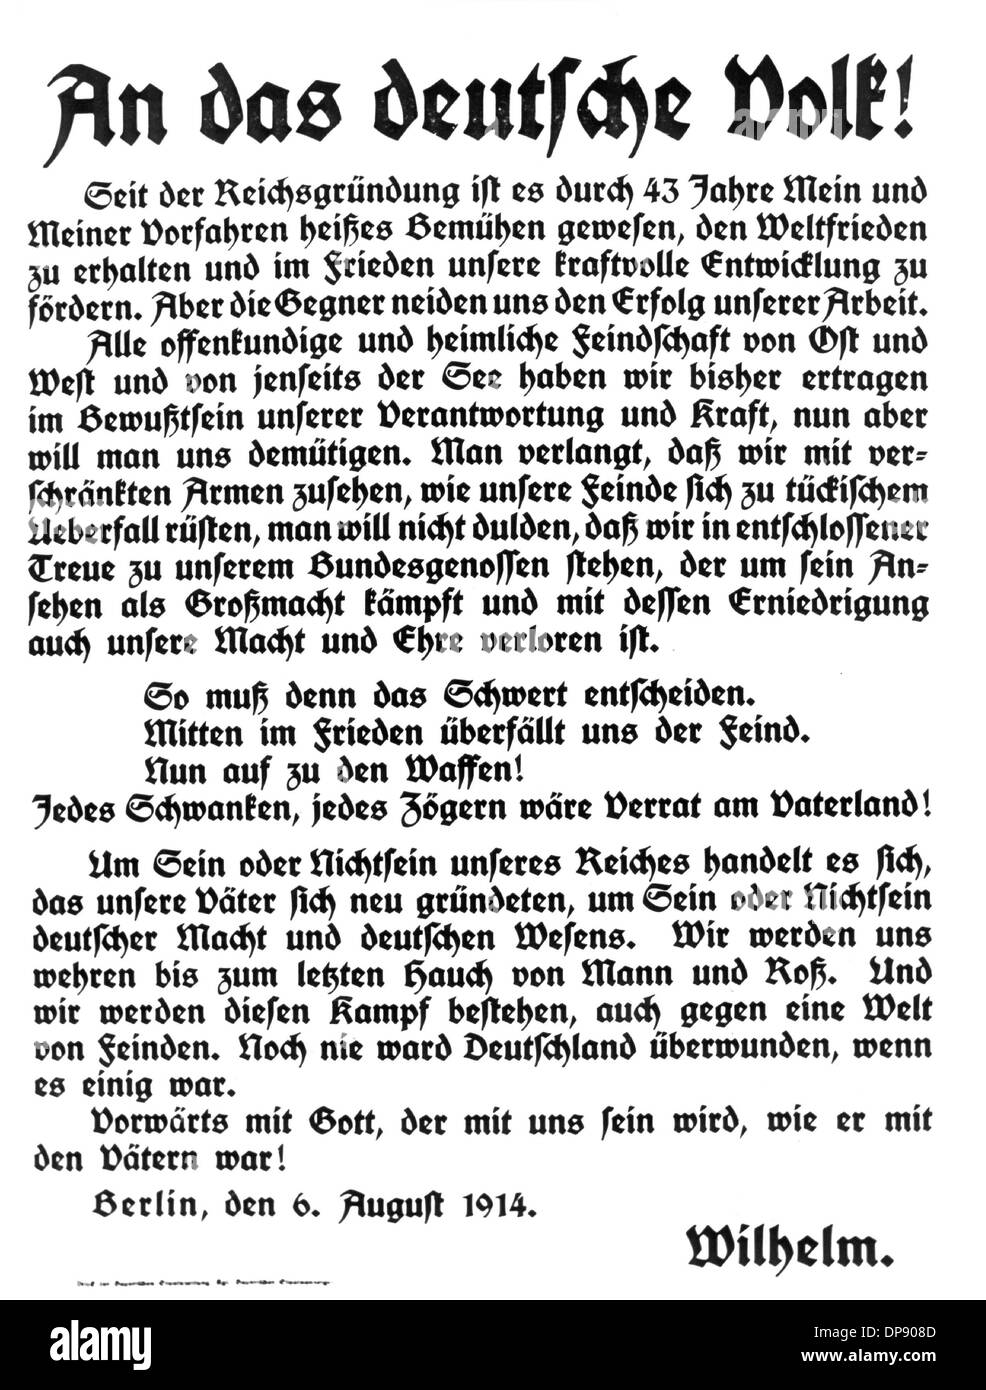 The appeal of Emperor Wilhelm II. to the German people on the occasion of the outbreak of war. Set off by the deadly shots on Austrian heir to the throne Franz Ferdinand by Serbian nationalists on the 28th of June in 1914 in Sarajevo, World War I broke out. During World War I, Germany, Austria, Austria-Hungary as well as later Turkey and Bulgary fought against Britain, France and Russia. The sad end result in 1918 comprised roughly 8.5 million soldiers killed in action, more than 21 million wounded and almost 8 million prisoners of war and missing people. Stock Photo